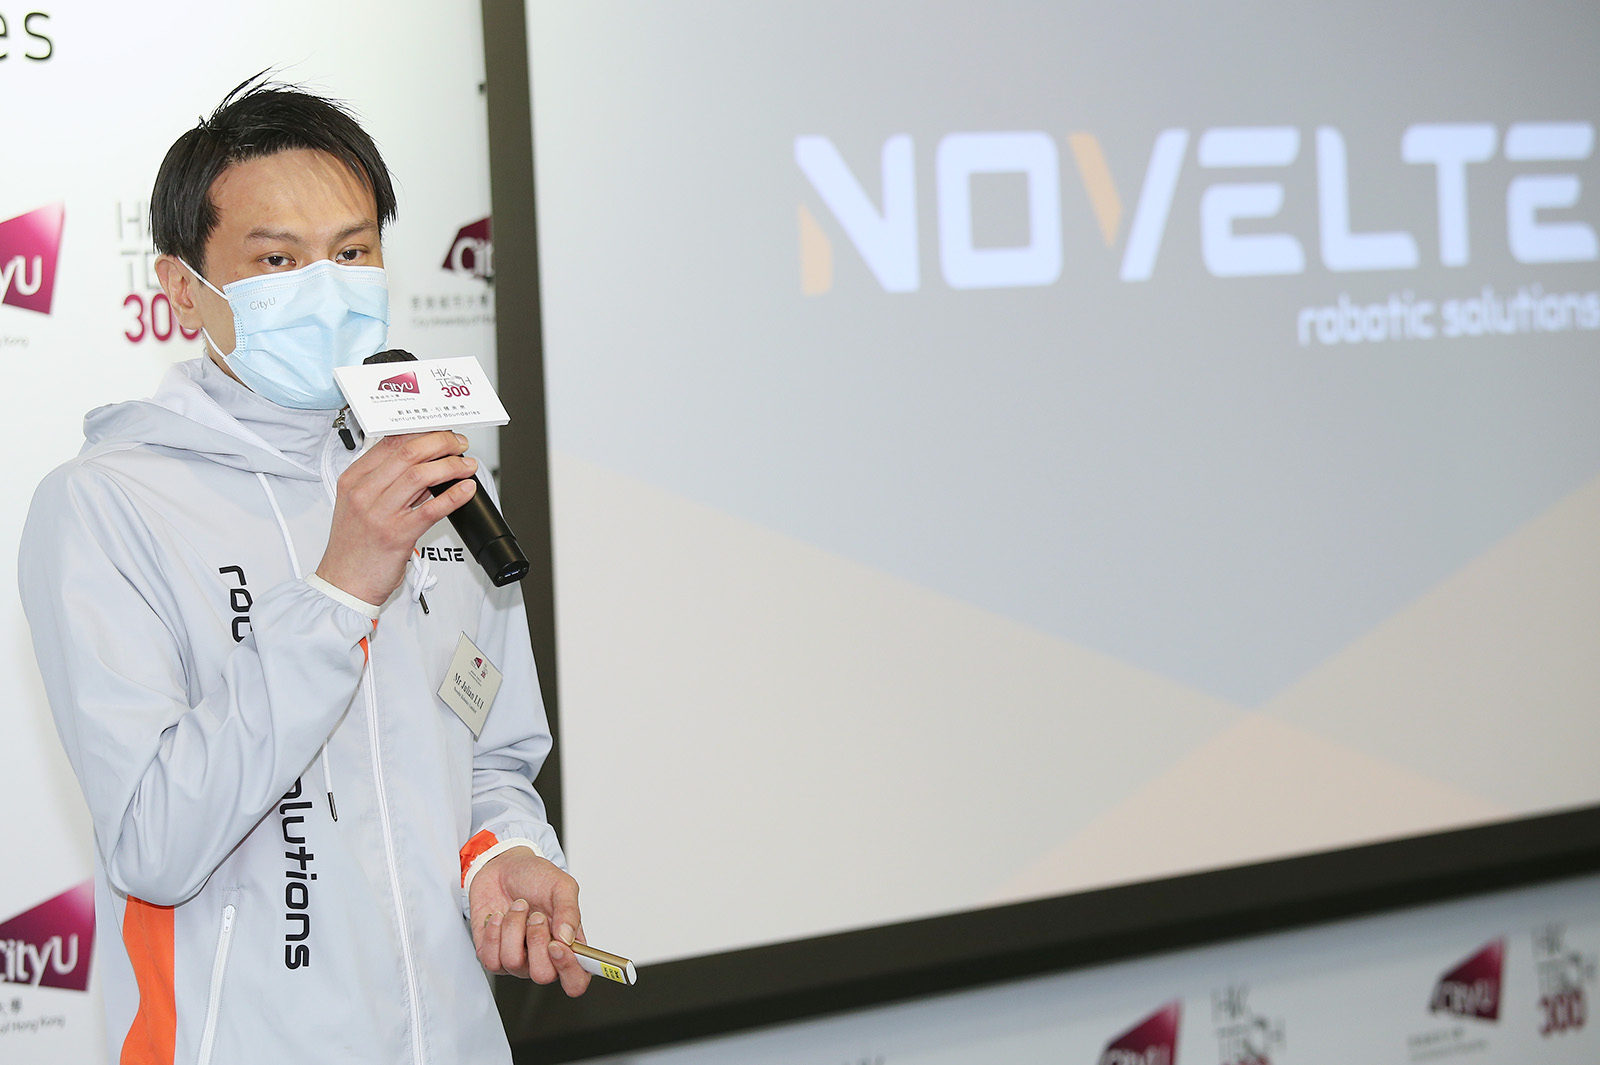 Novelte Robotics Limited is another start-up that has received investment. Mr Julian Lui Chung-yin, CEO and CityU alumnus, introduced the core technology for smarter robots developed by the start-up and talked about the proliferation of future robotic applications during the signing ceremony. 